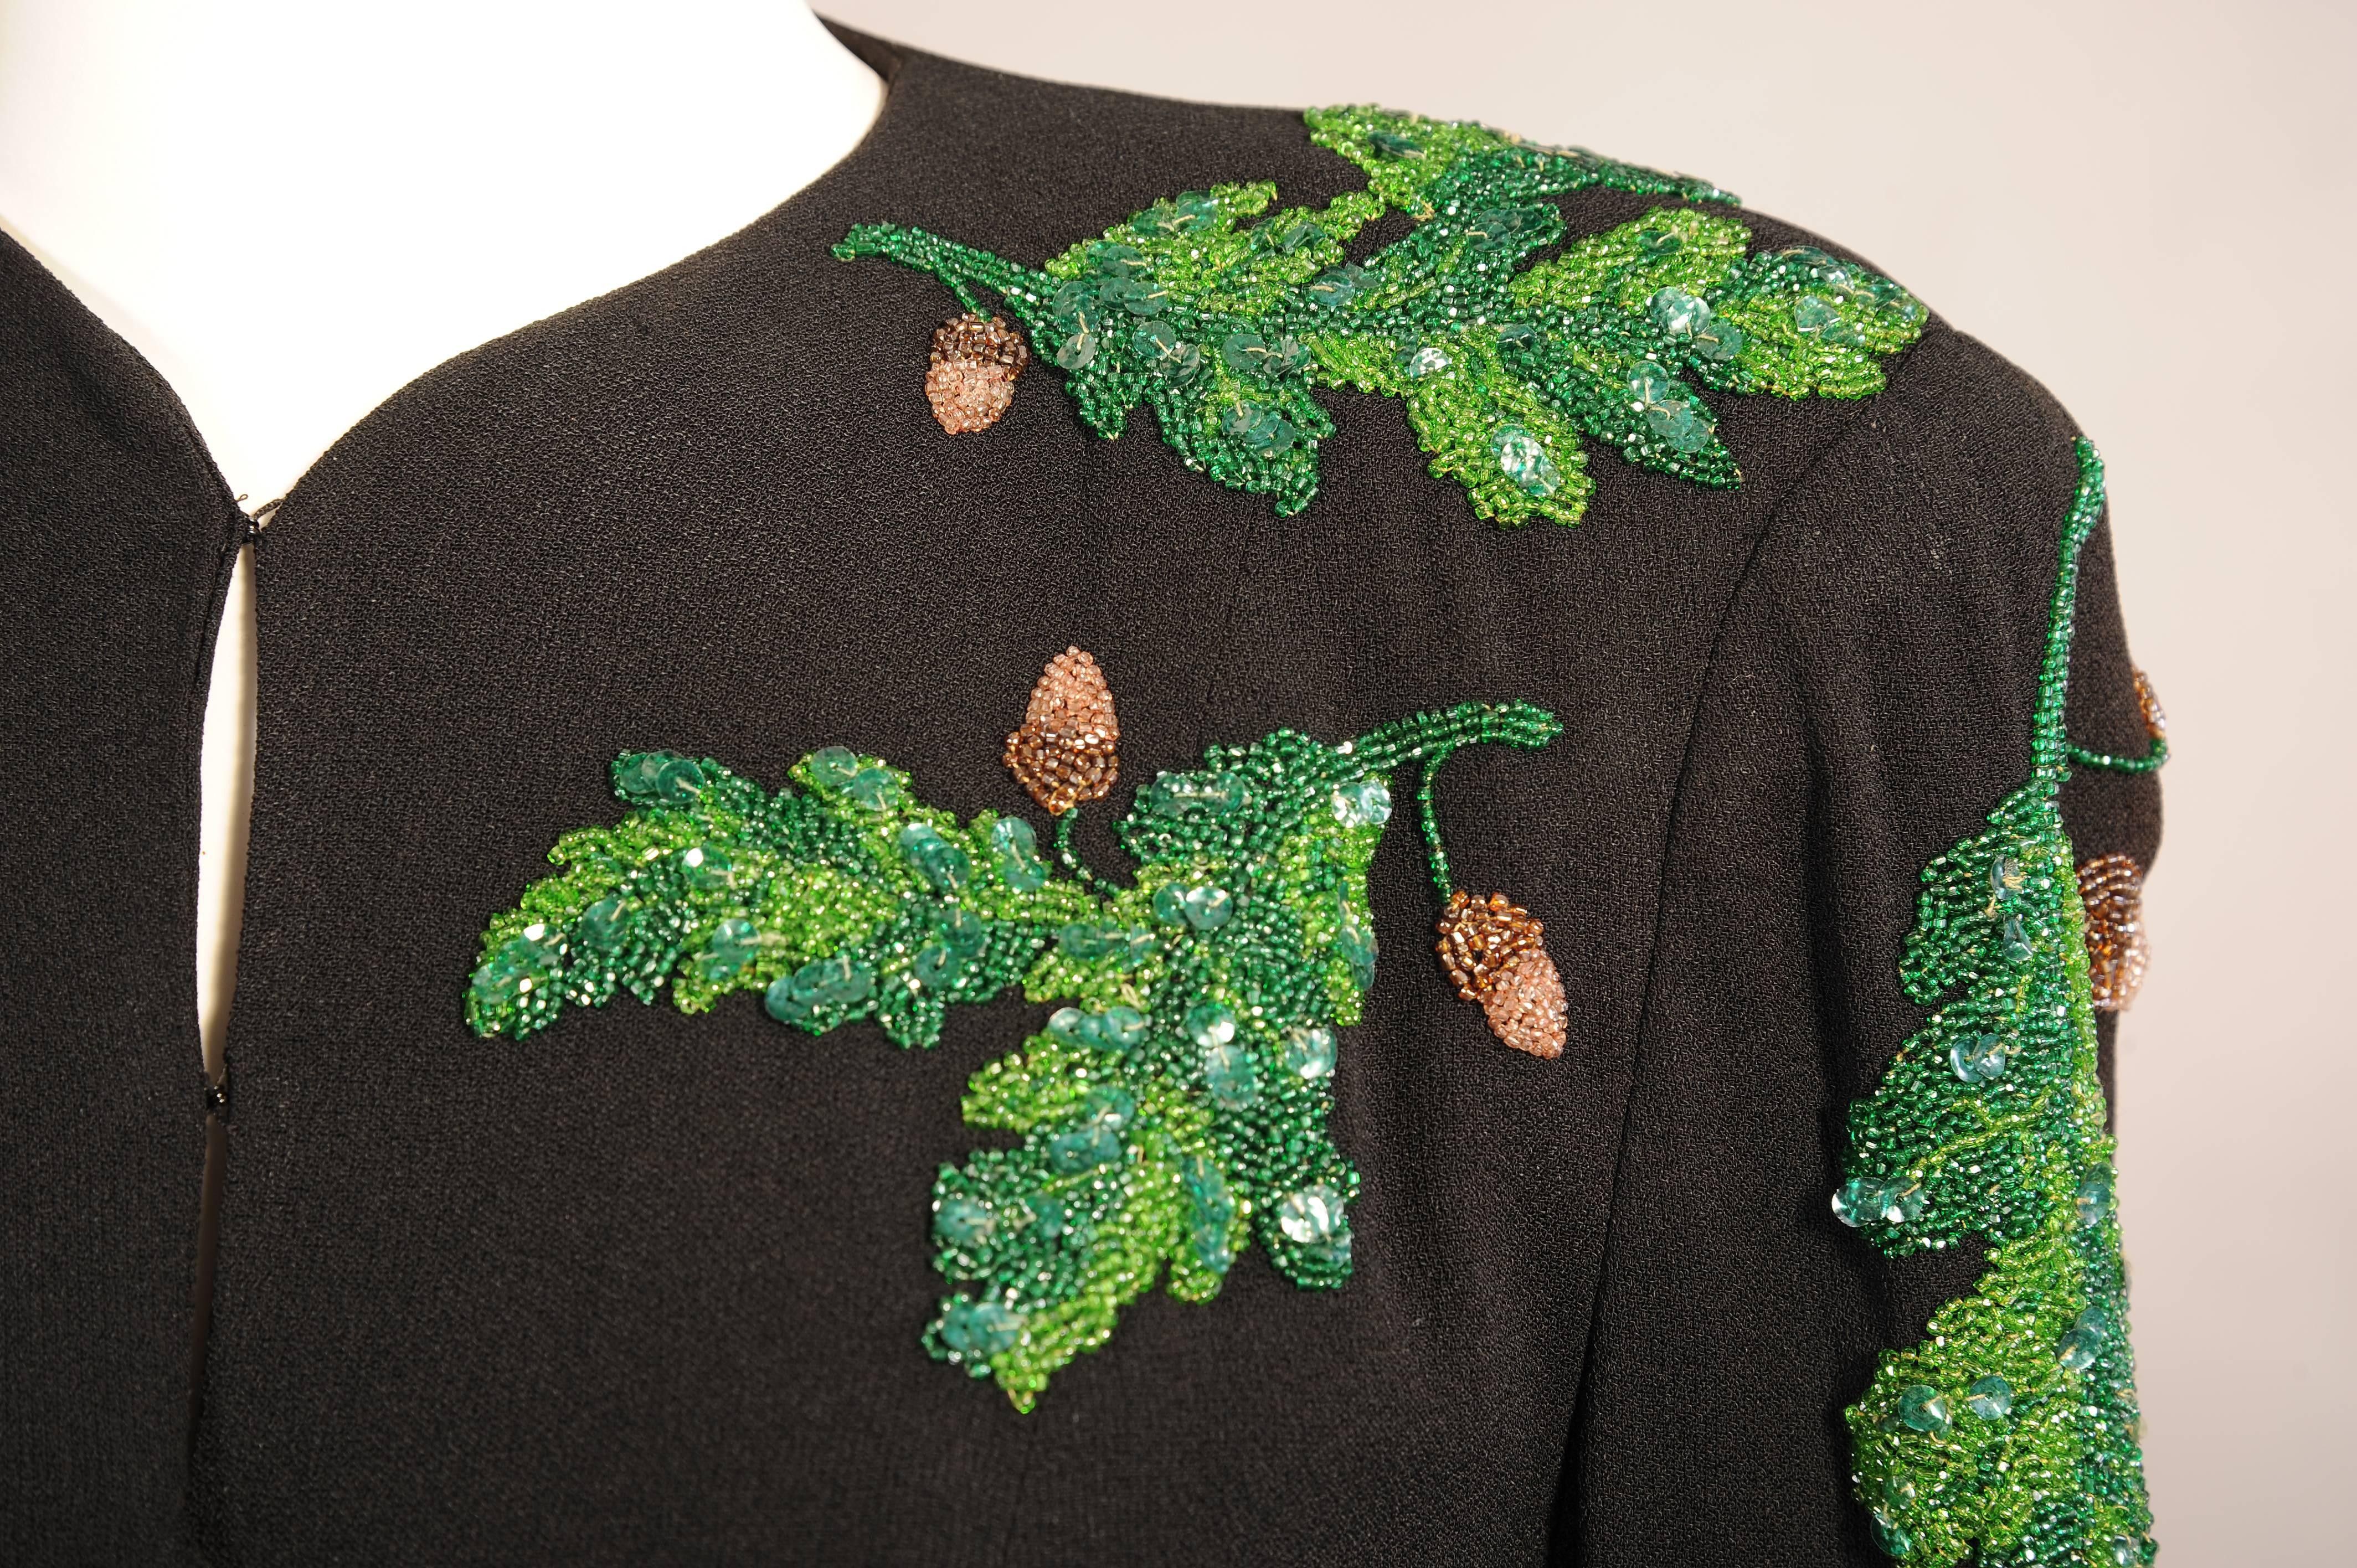 This clean lined 1940's black crepe jacket has a five button closure, two faux pockets and fantastic beaded decoration.  The oak leaves are done with caviar beads in several shades of green which are enhanced with green sequins for added depth of